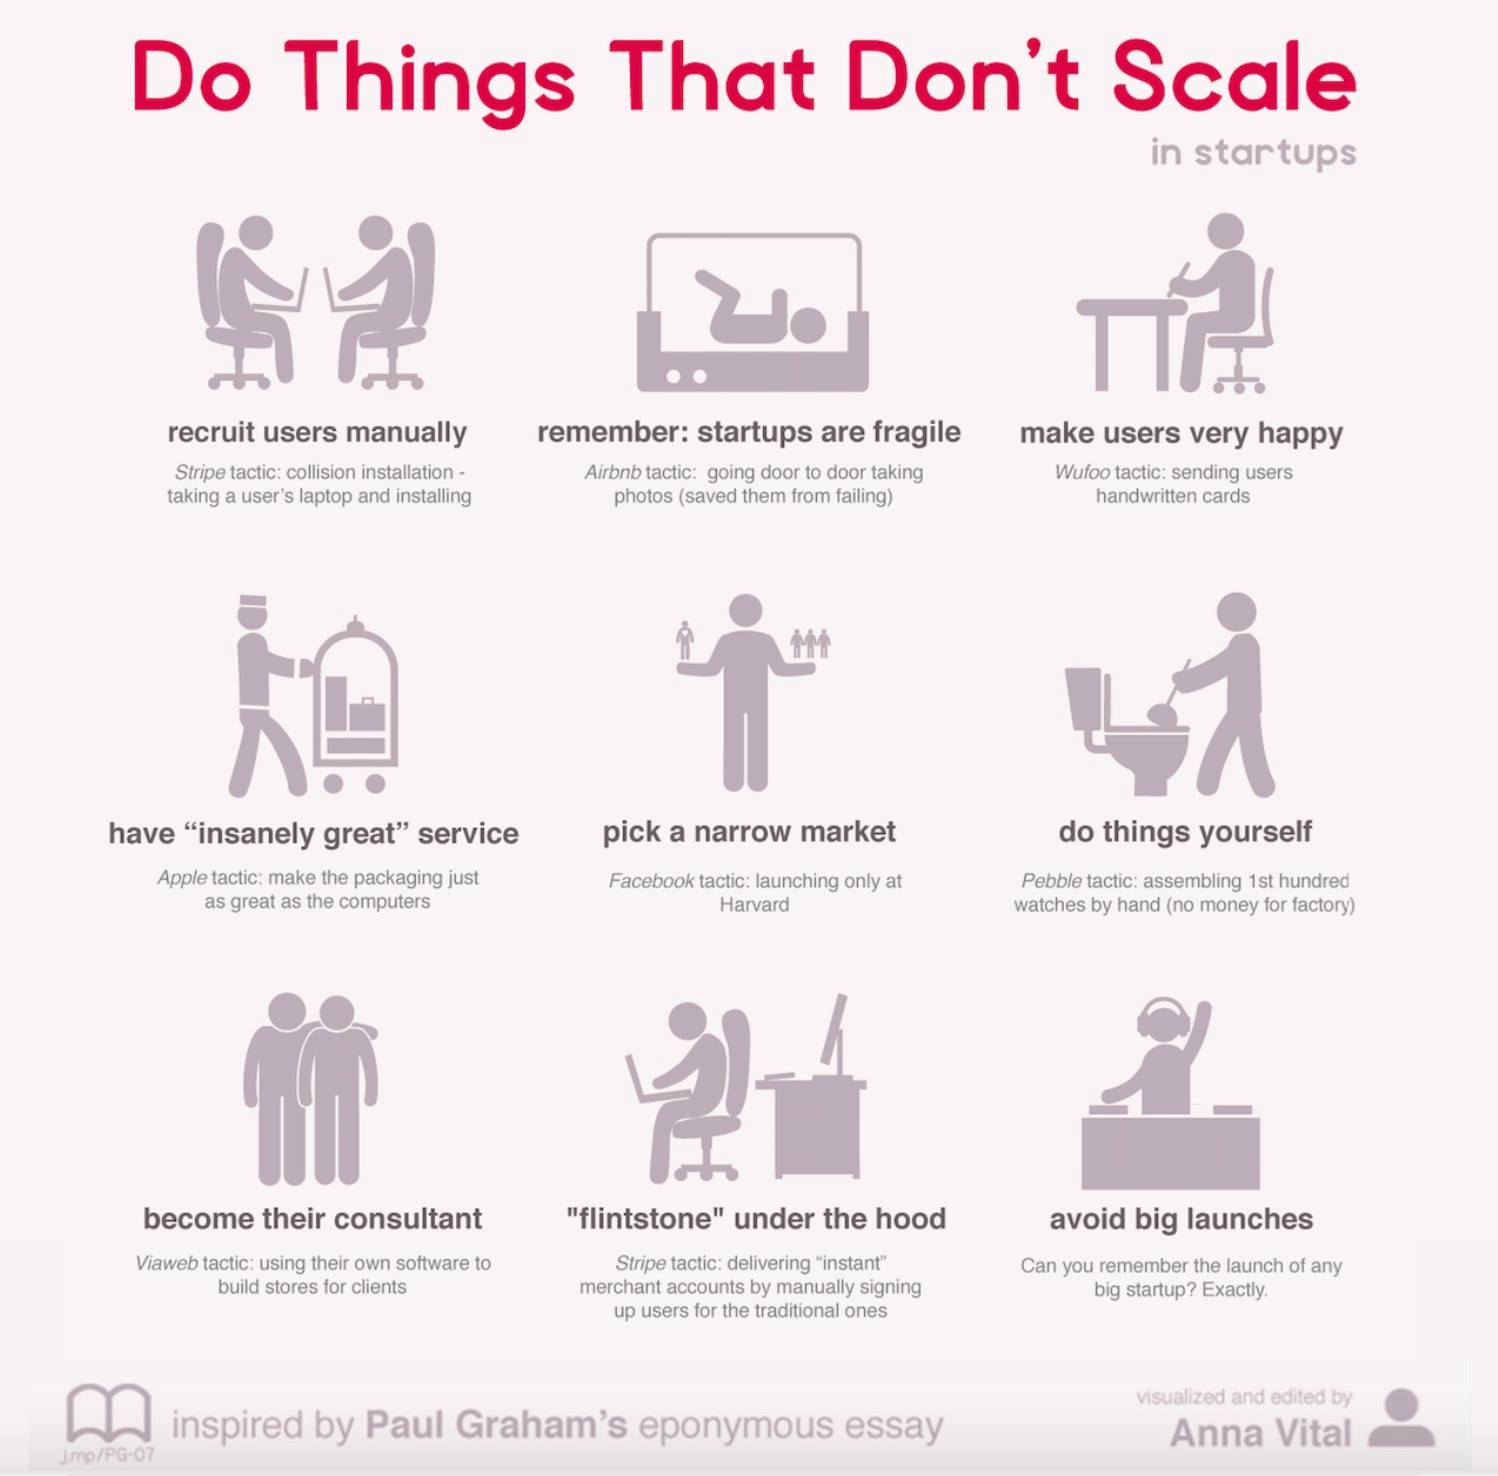 dontscale